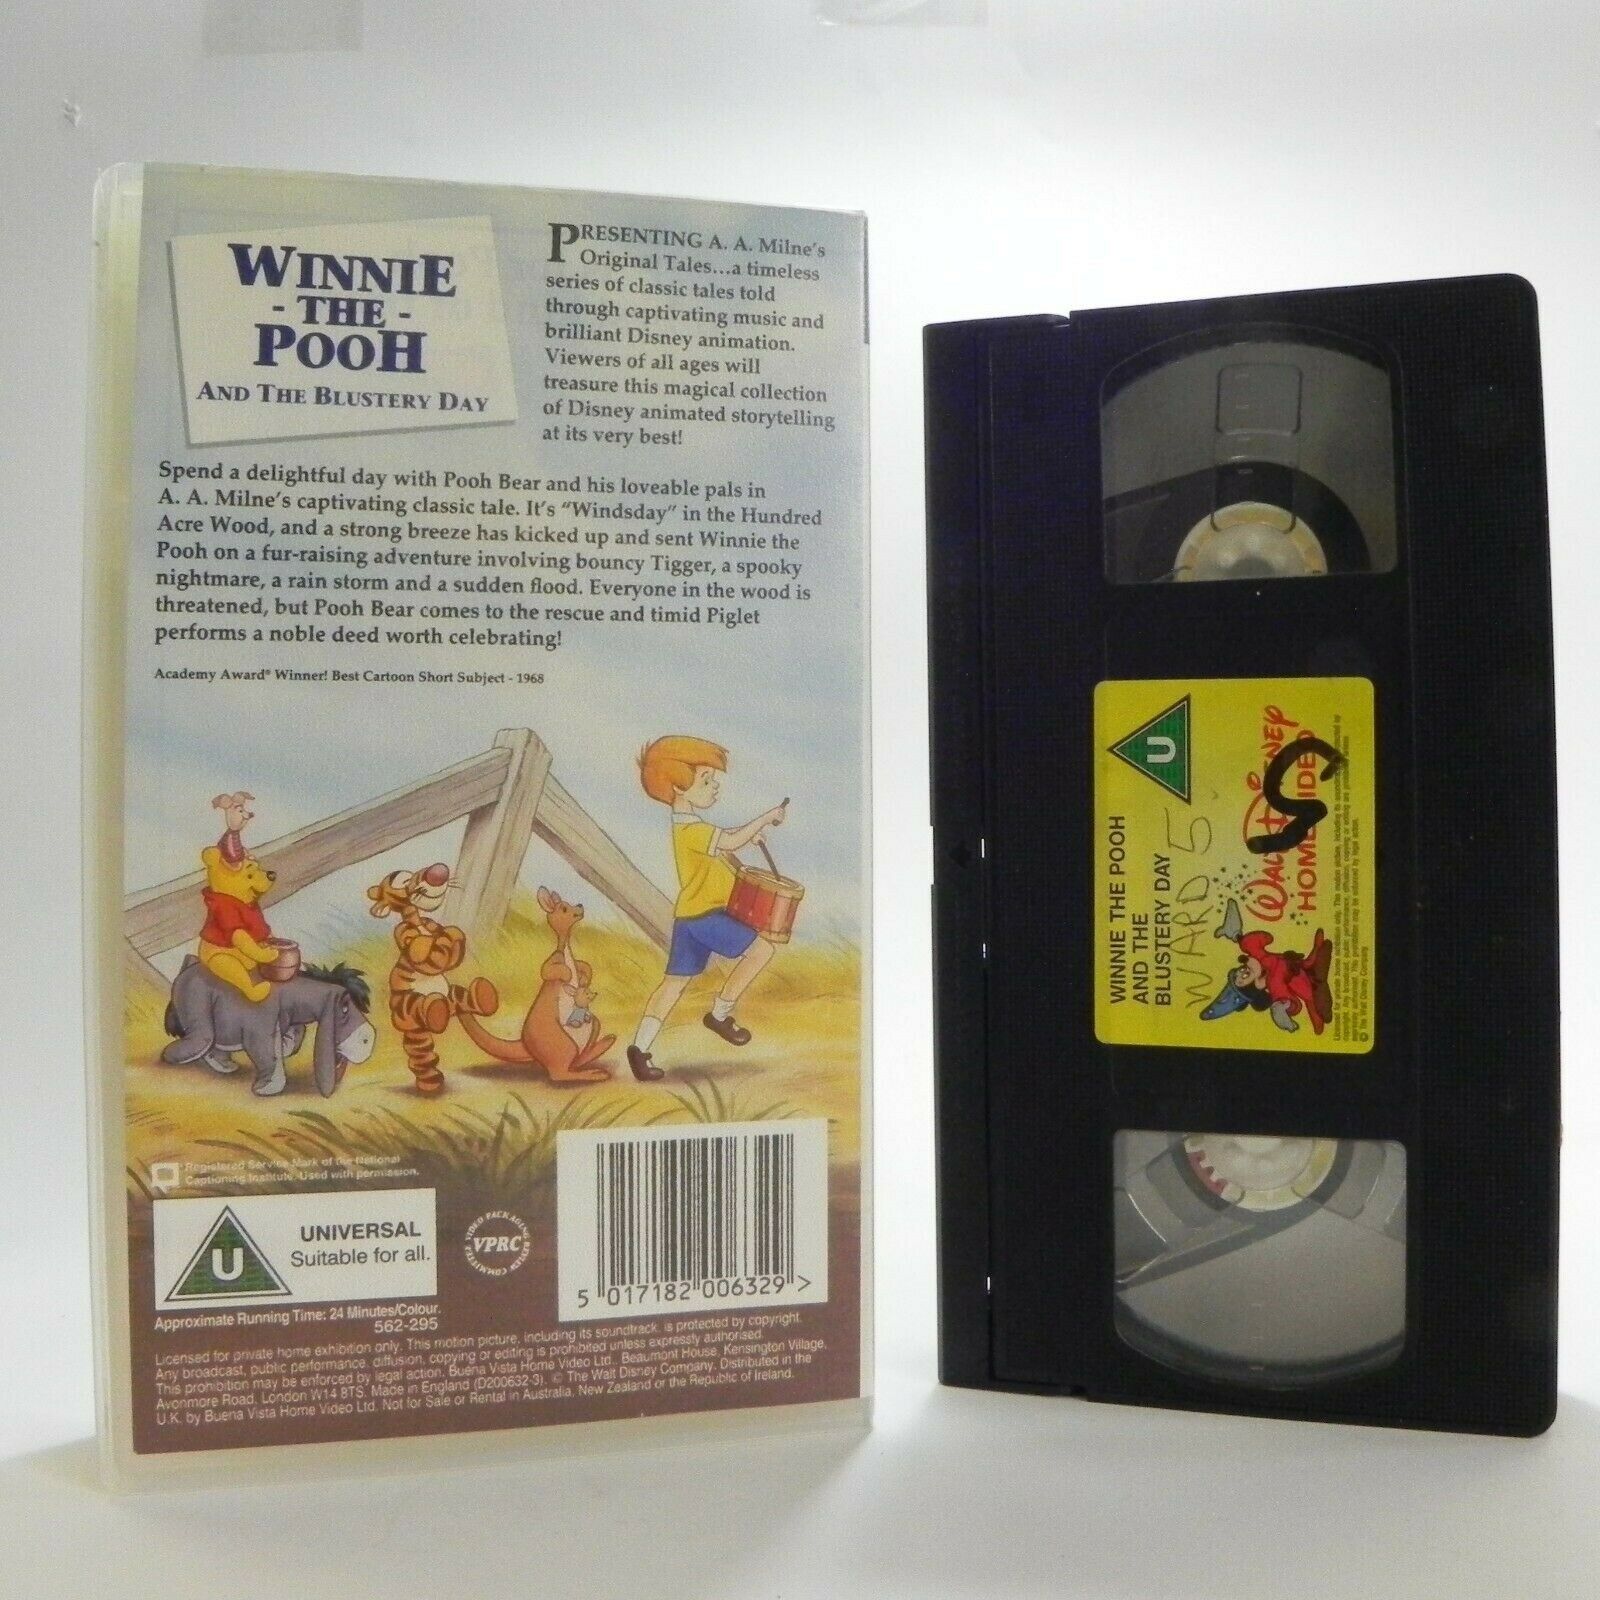 Winnie The Pooh And The Blustery Day - A.A. Milne's Original Tales - Kids - VHS-